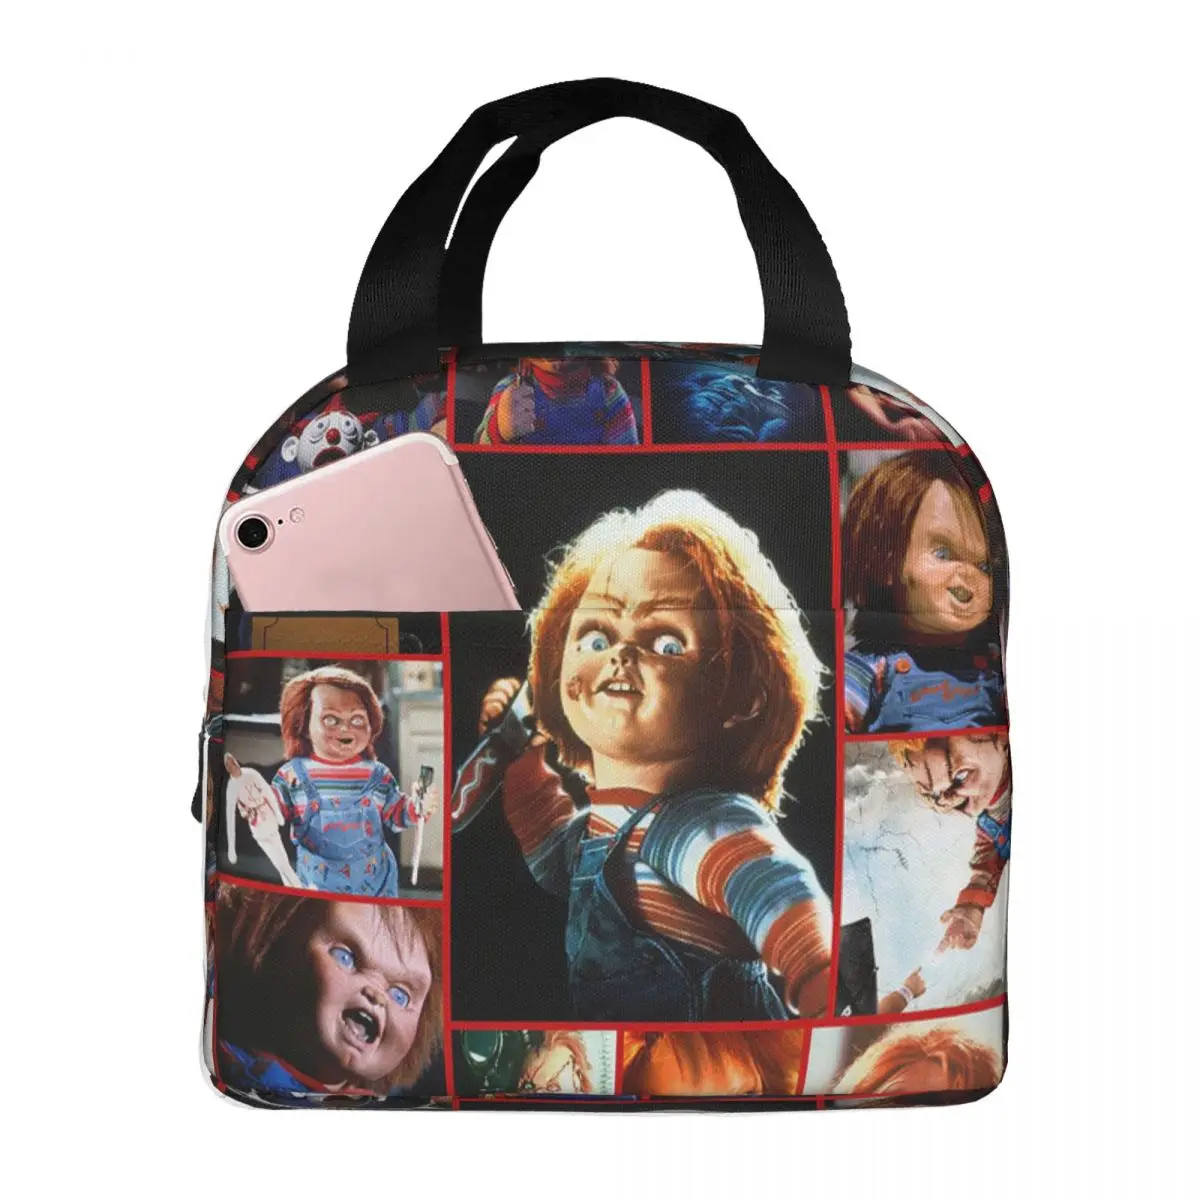 

Lunch Bags Horror Moive Child Of Play Character Chucky Insulated Thermal Cooler Portable Picnic Travel Oxford Tote Bento Pouch